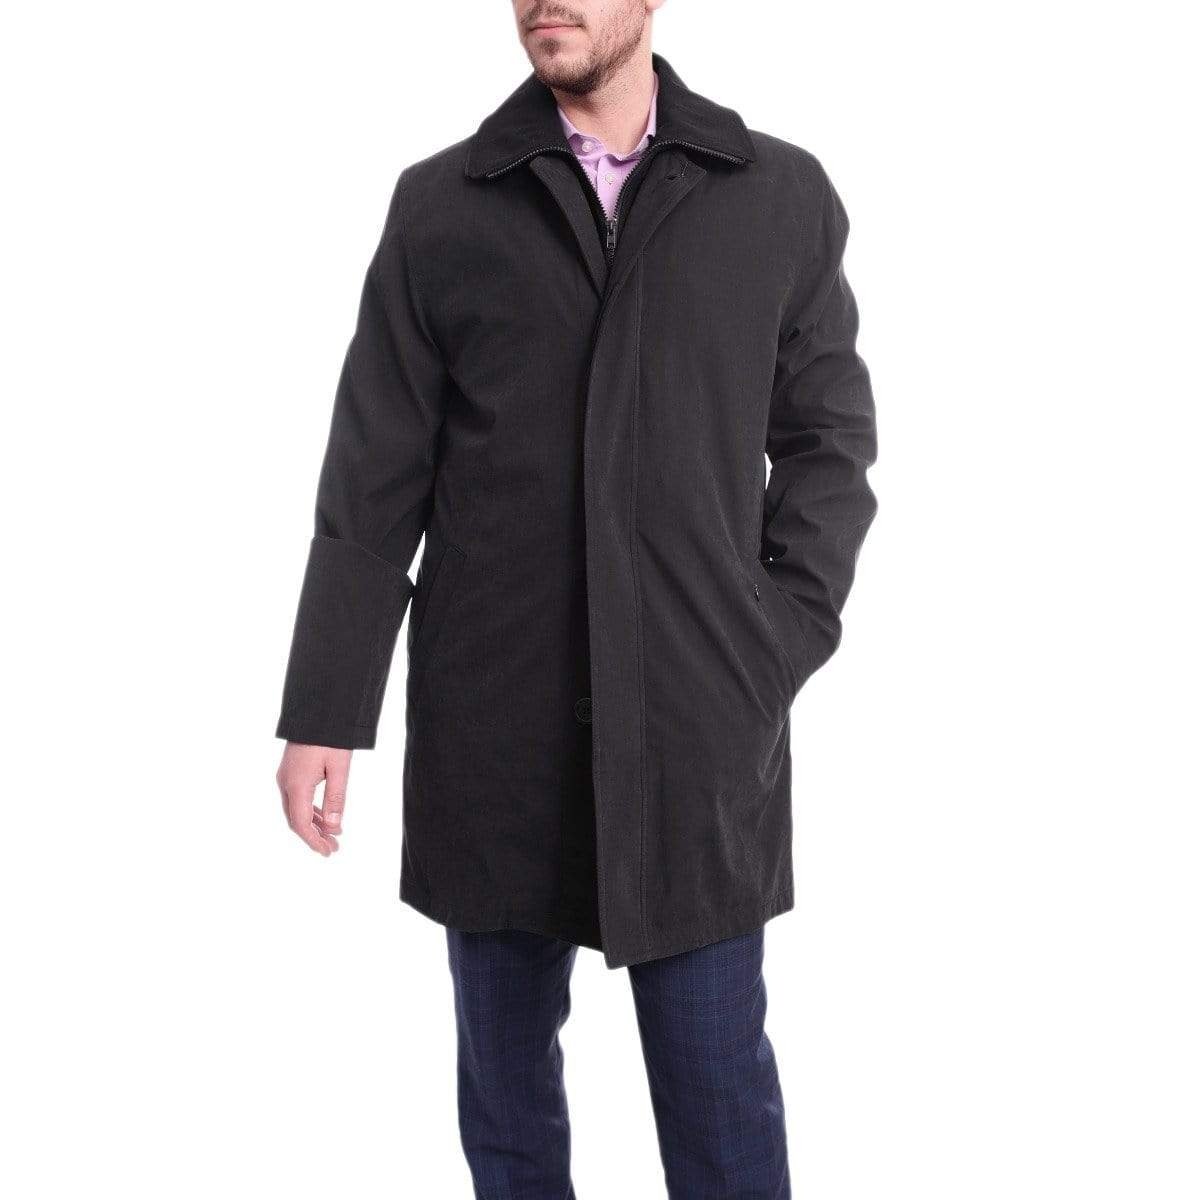 Cianni Cellini Dress Coats 46S Men's Rain-proof Iconic Black Trench Coat Jacket With Removable Liner